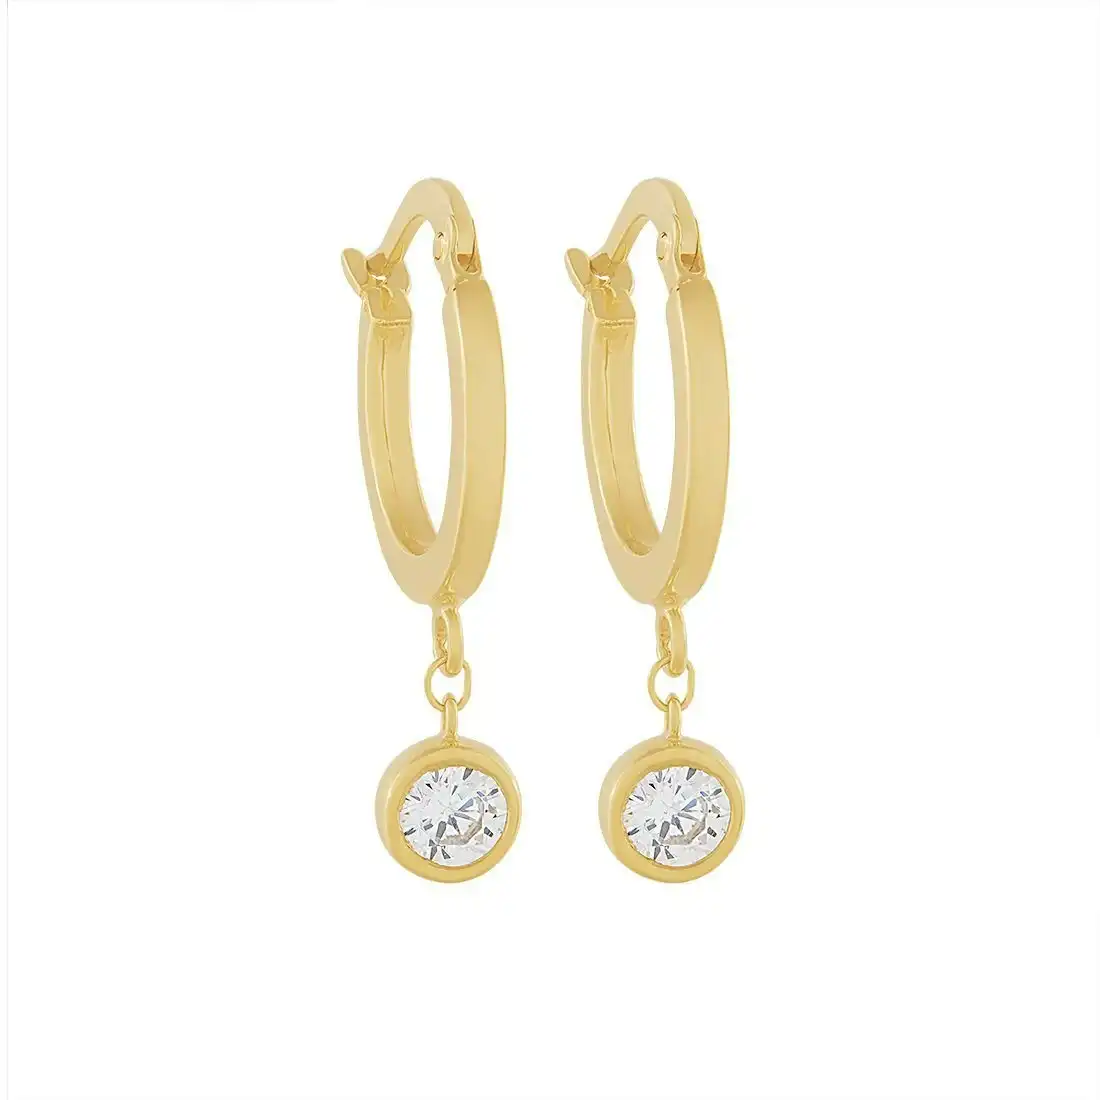 9ct Yellow Gold Silver Infused Hoop Earrings with Cubic Zirconia Drop